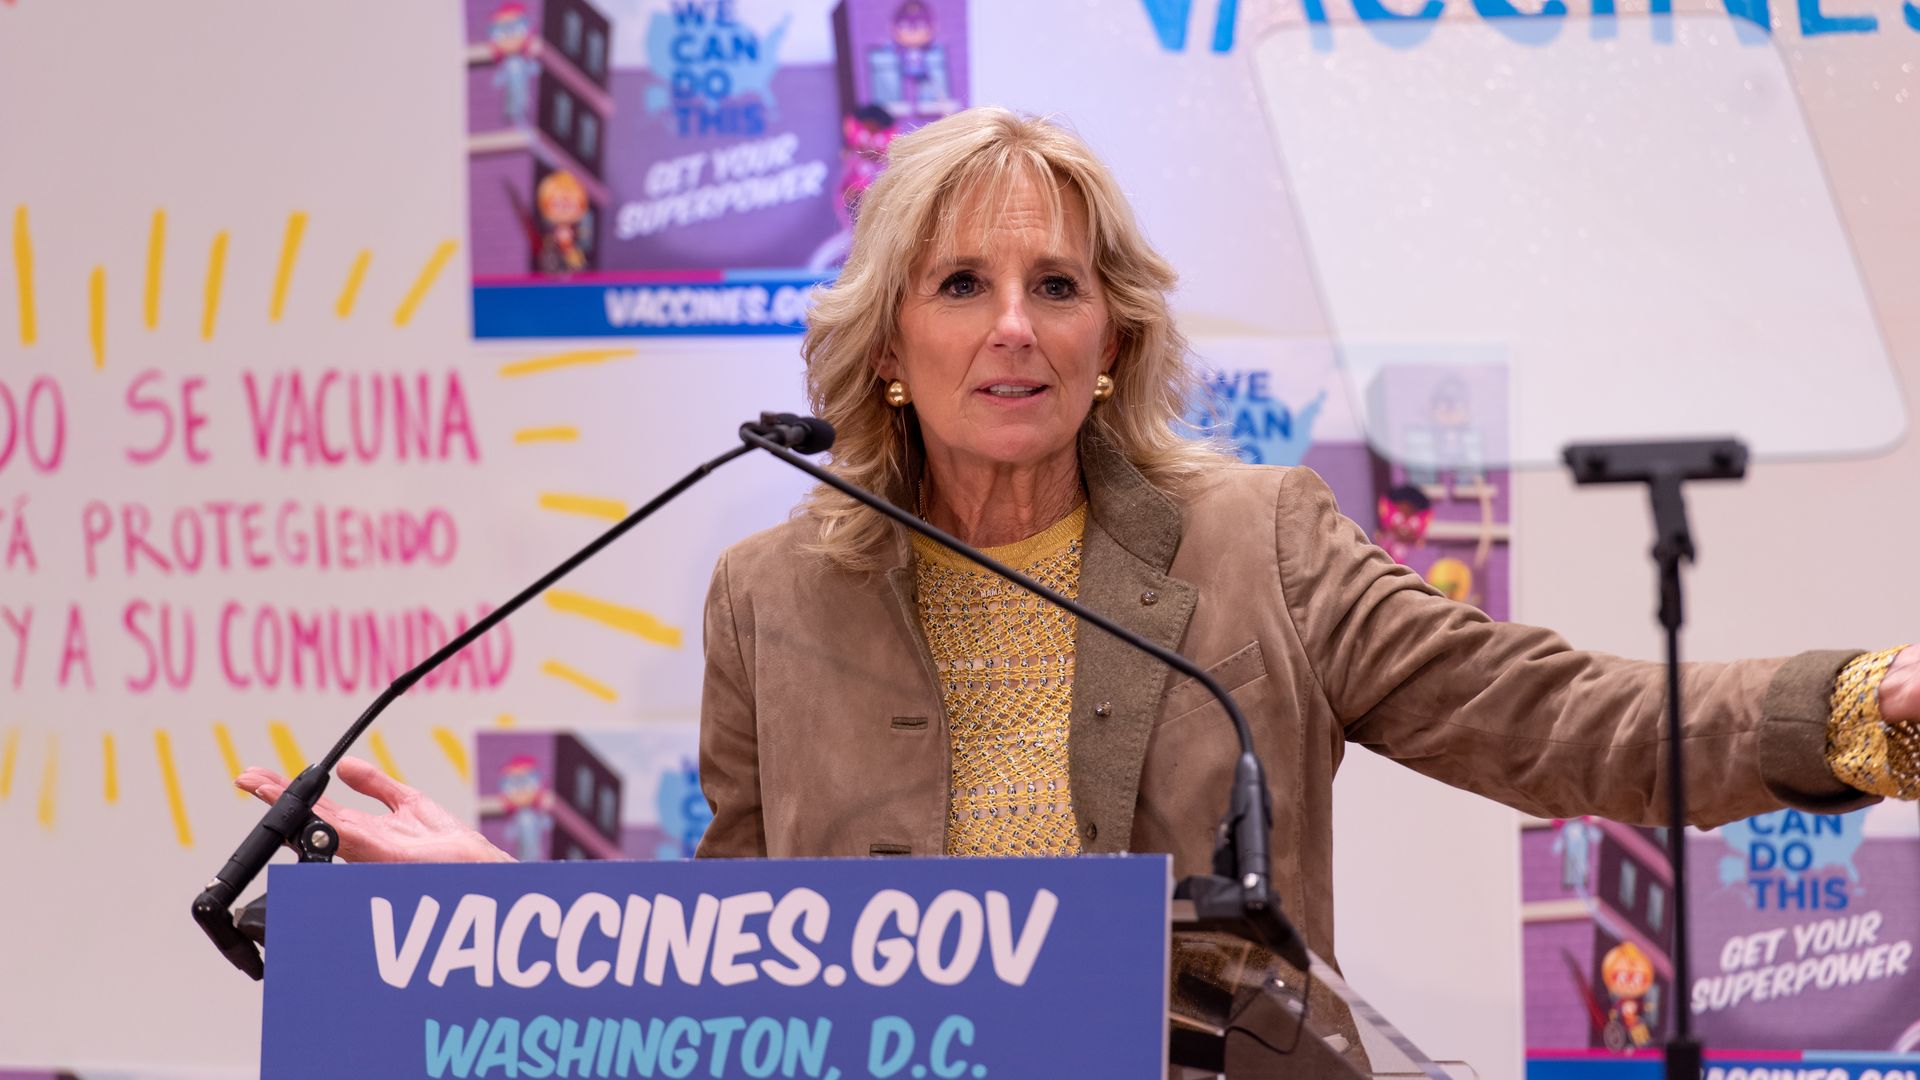 First lady Jill Biden is seen speaking at a vaccination clinic in Washington, D.C.